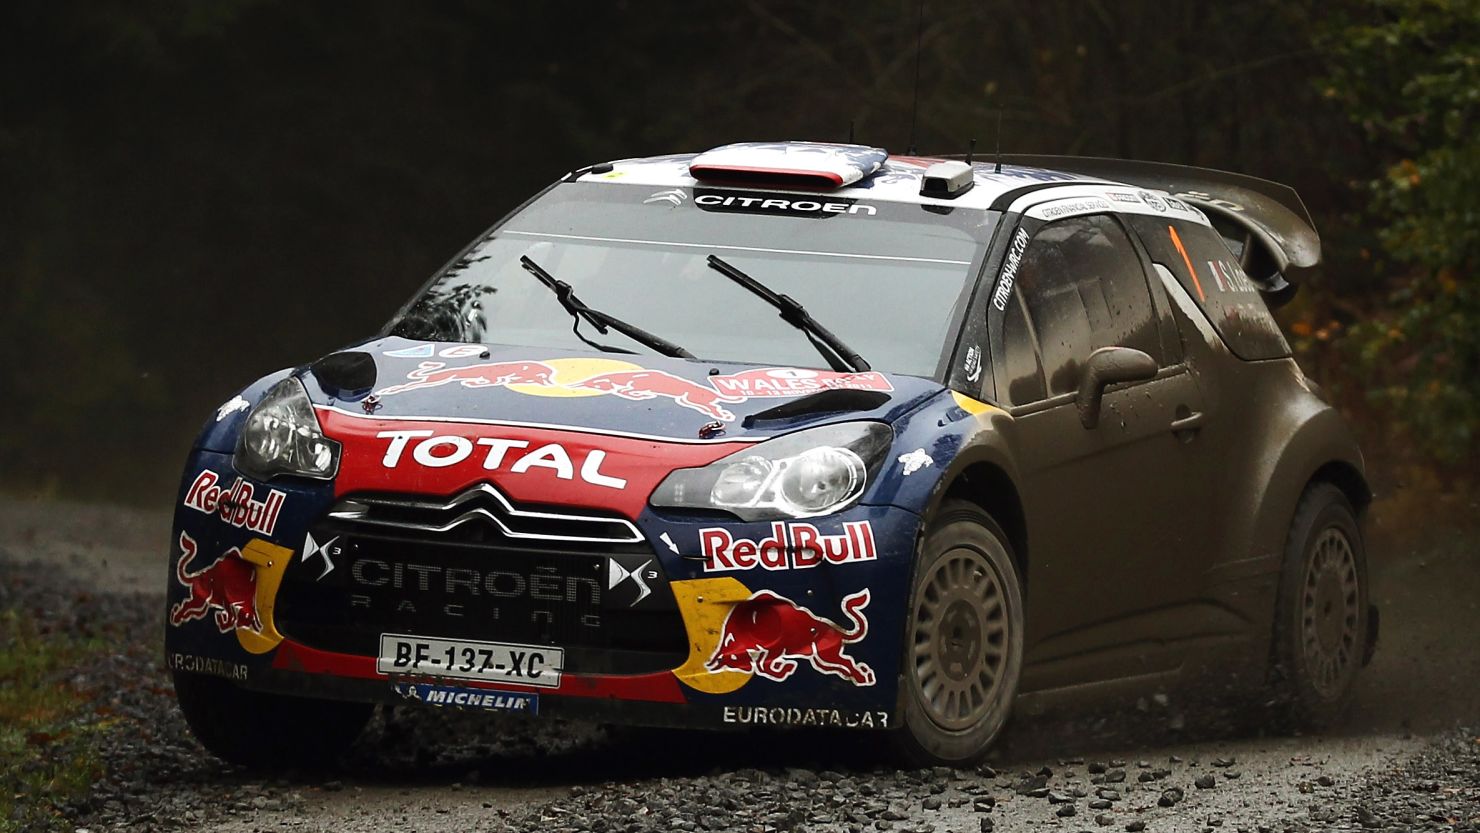 Sebastien Loeb powers his Citroen through as he leads the Wales Rally GB and clinches world title.